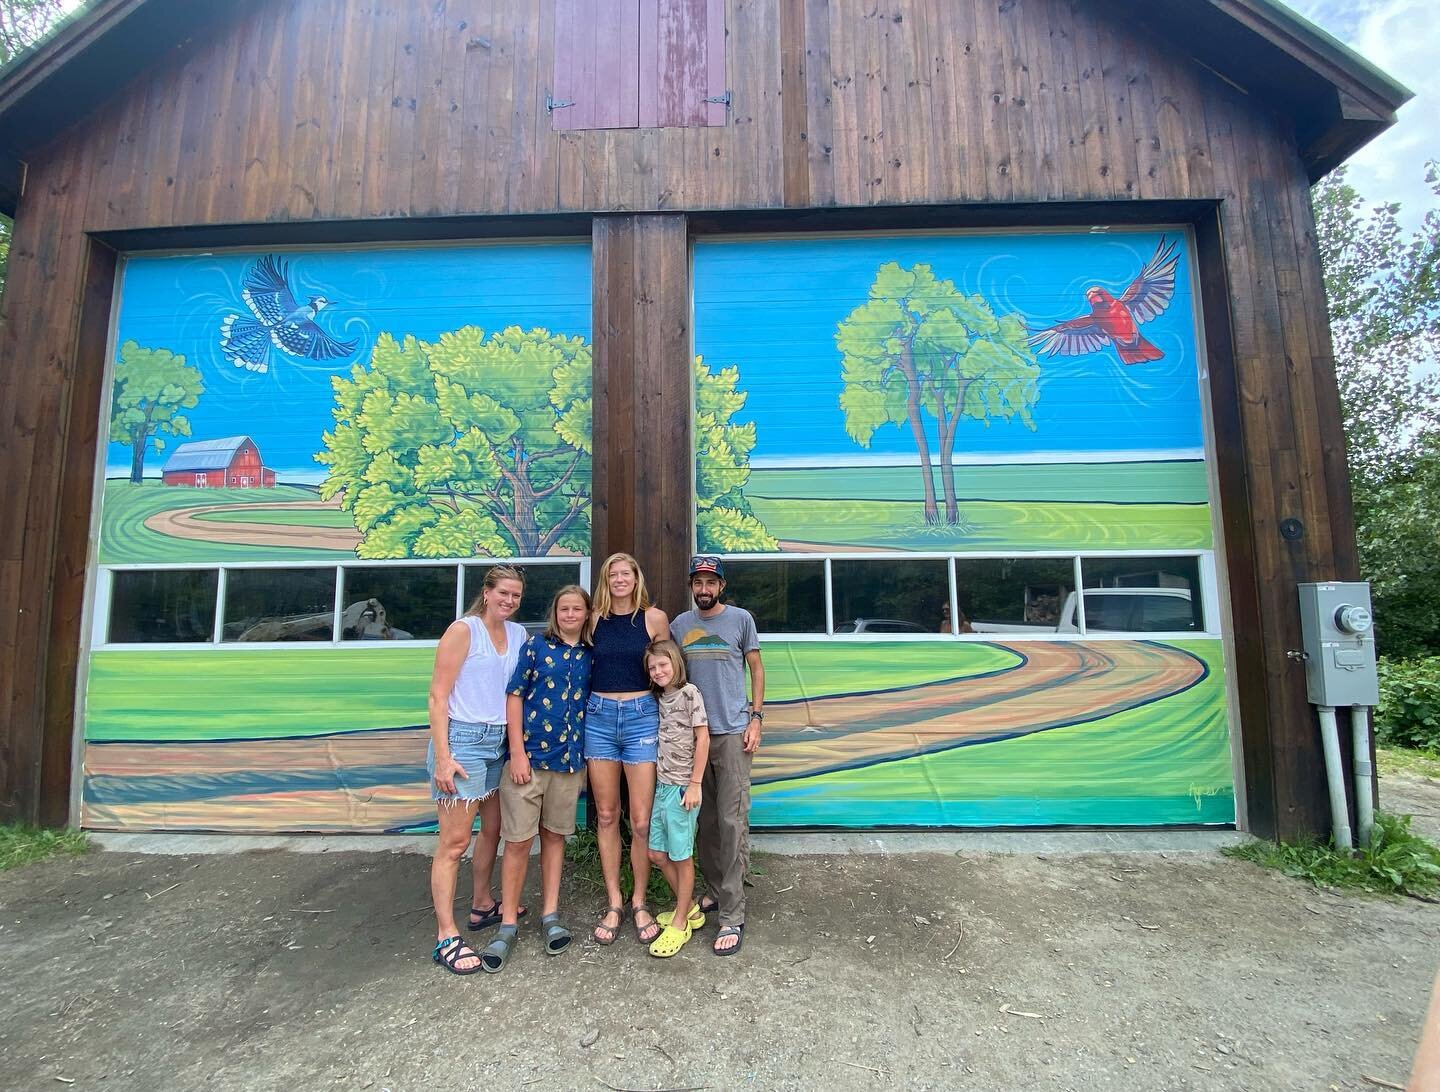 The mural @vermontarborists via @michaelrochearborist is all finished!! Michael &amp; his team were incredibly kind &amp; generous over the past week as I worked &amp; I hope the 22x15&rsquo; mural gives them a breath of fresh air every time they rol